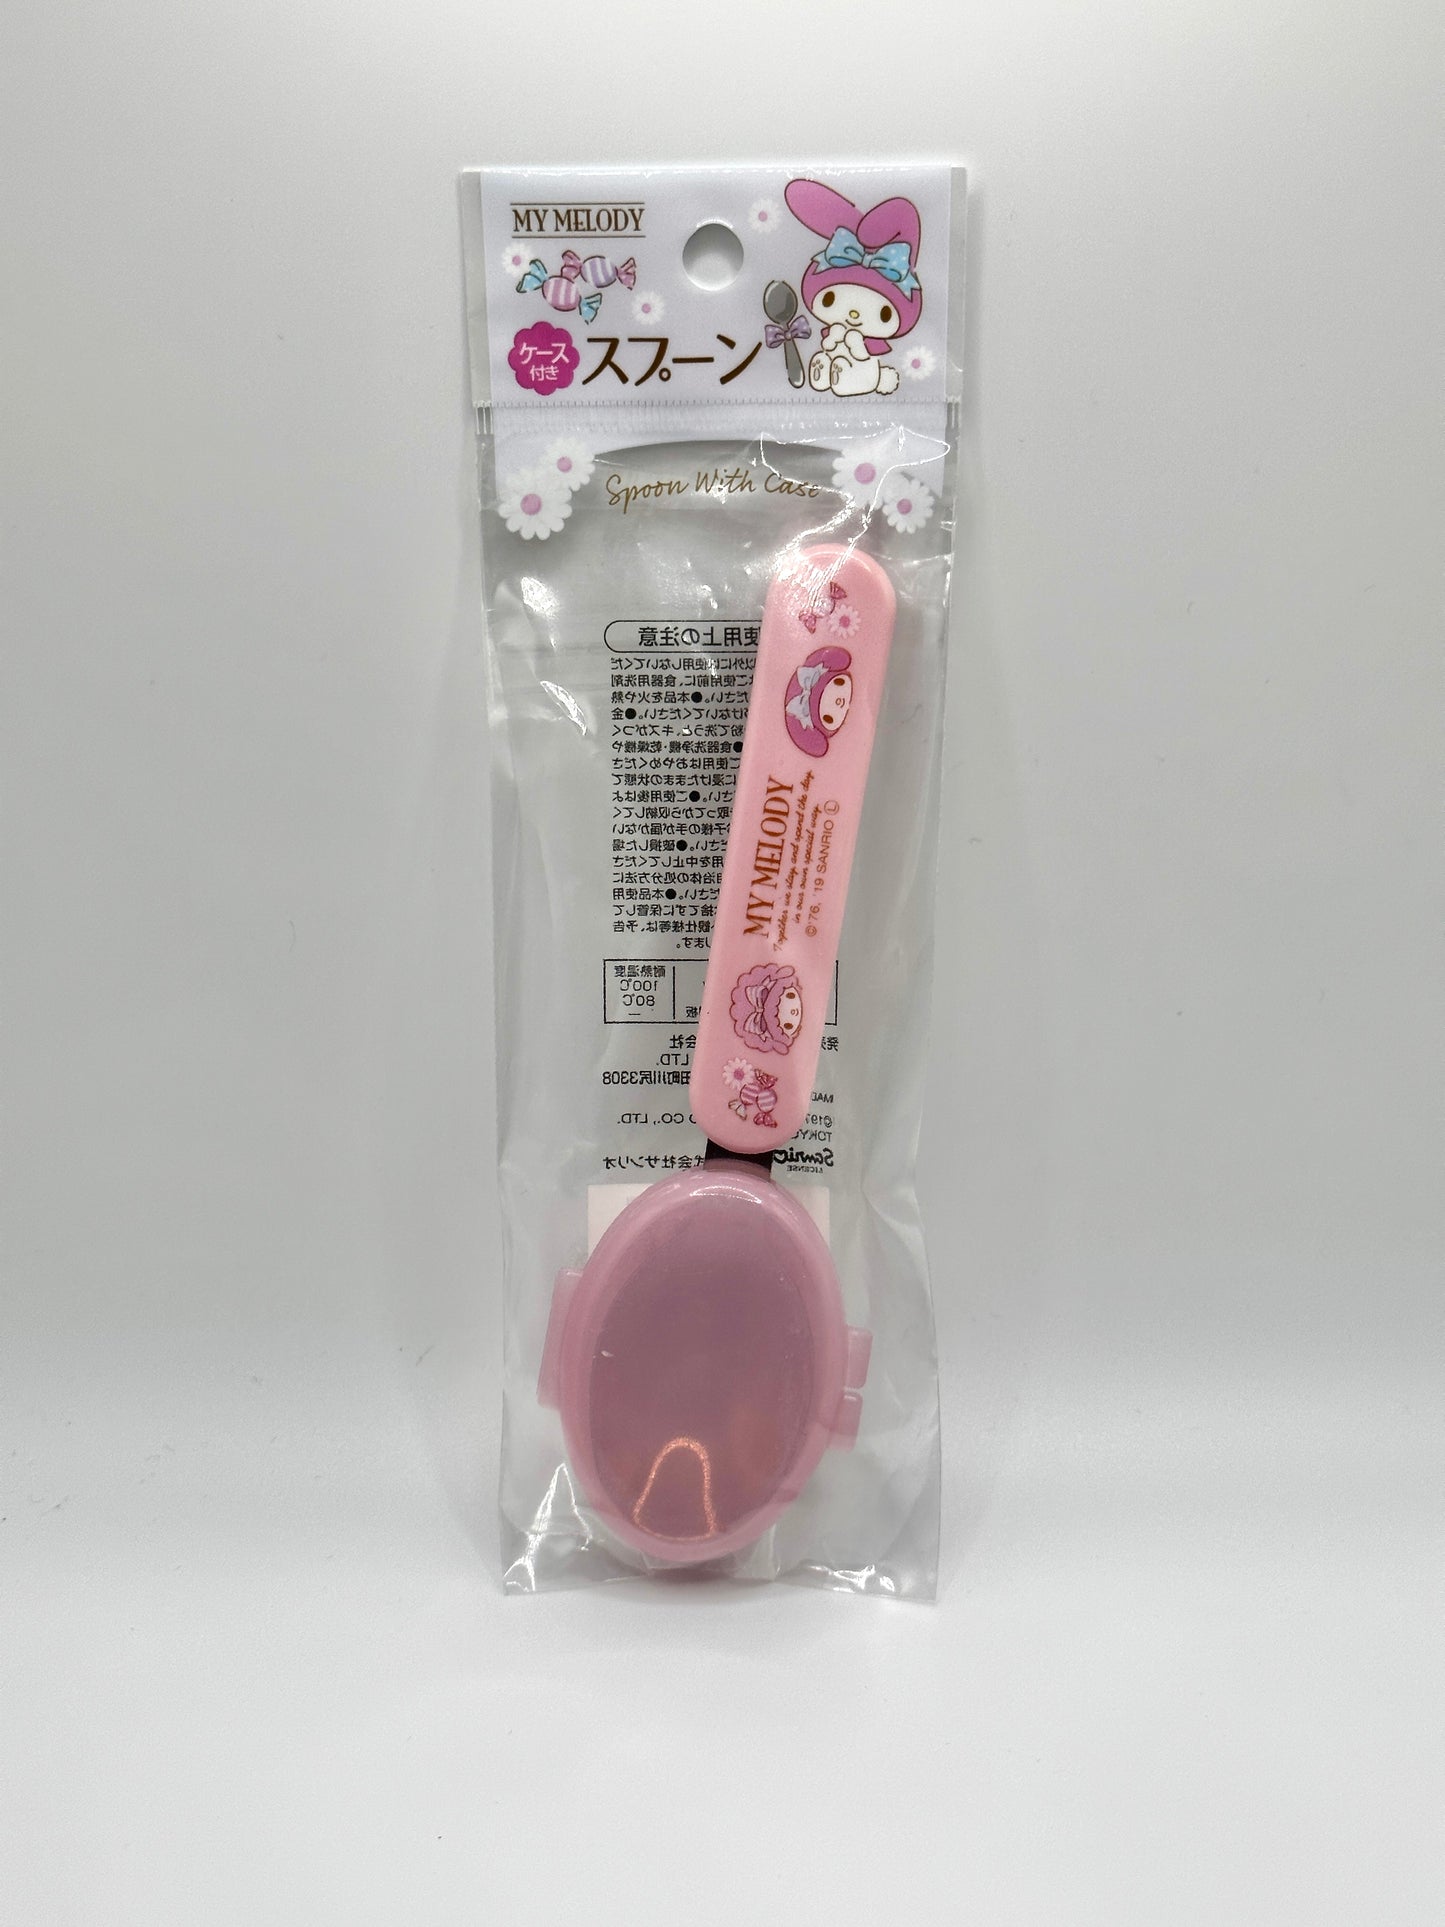 My Melody Spoon with Case